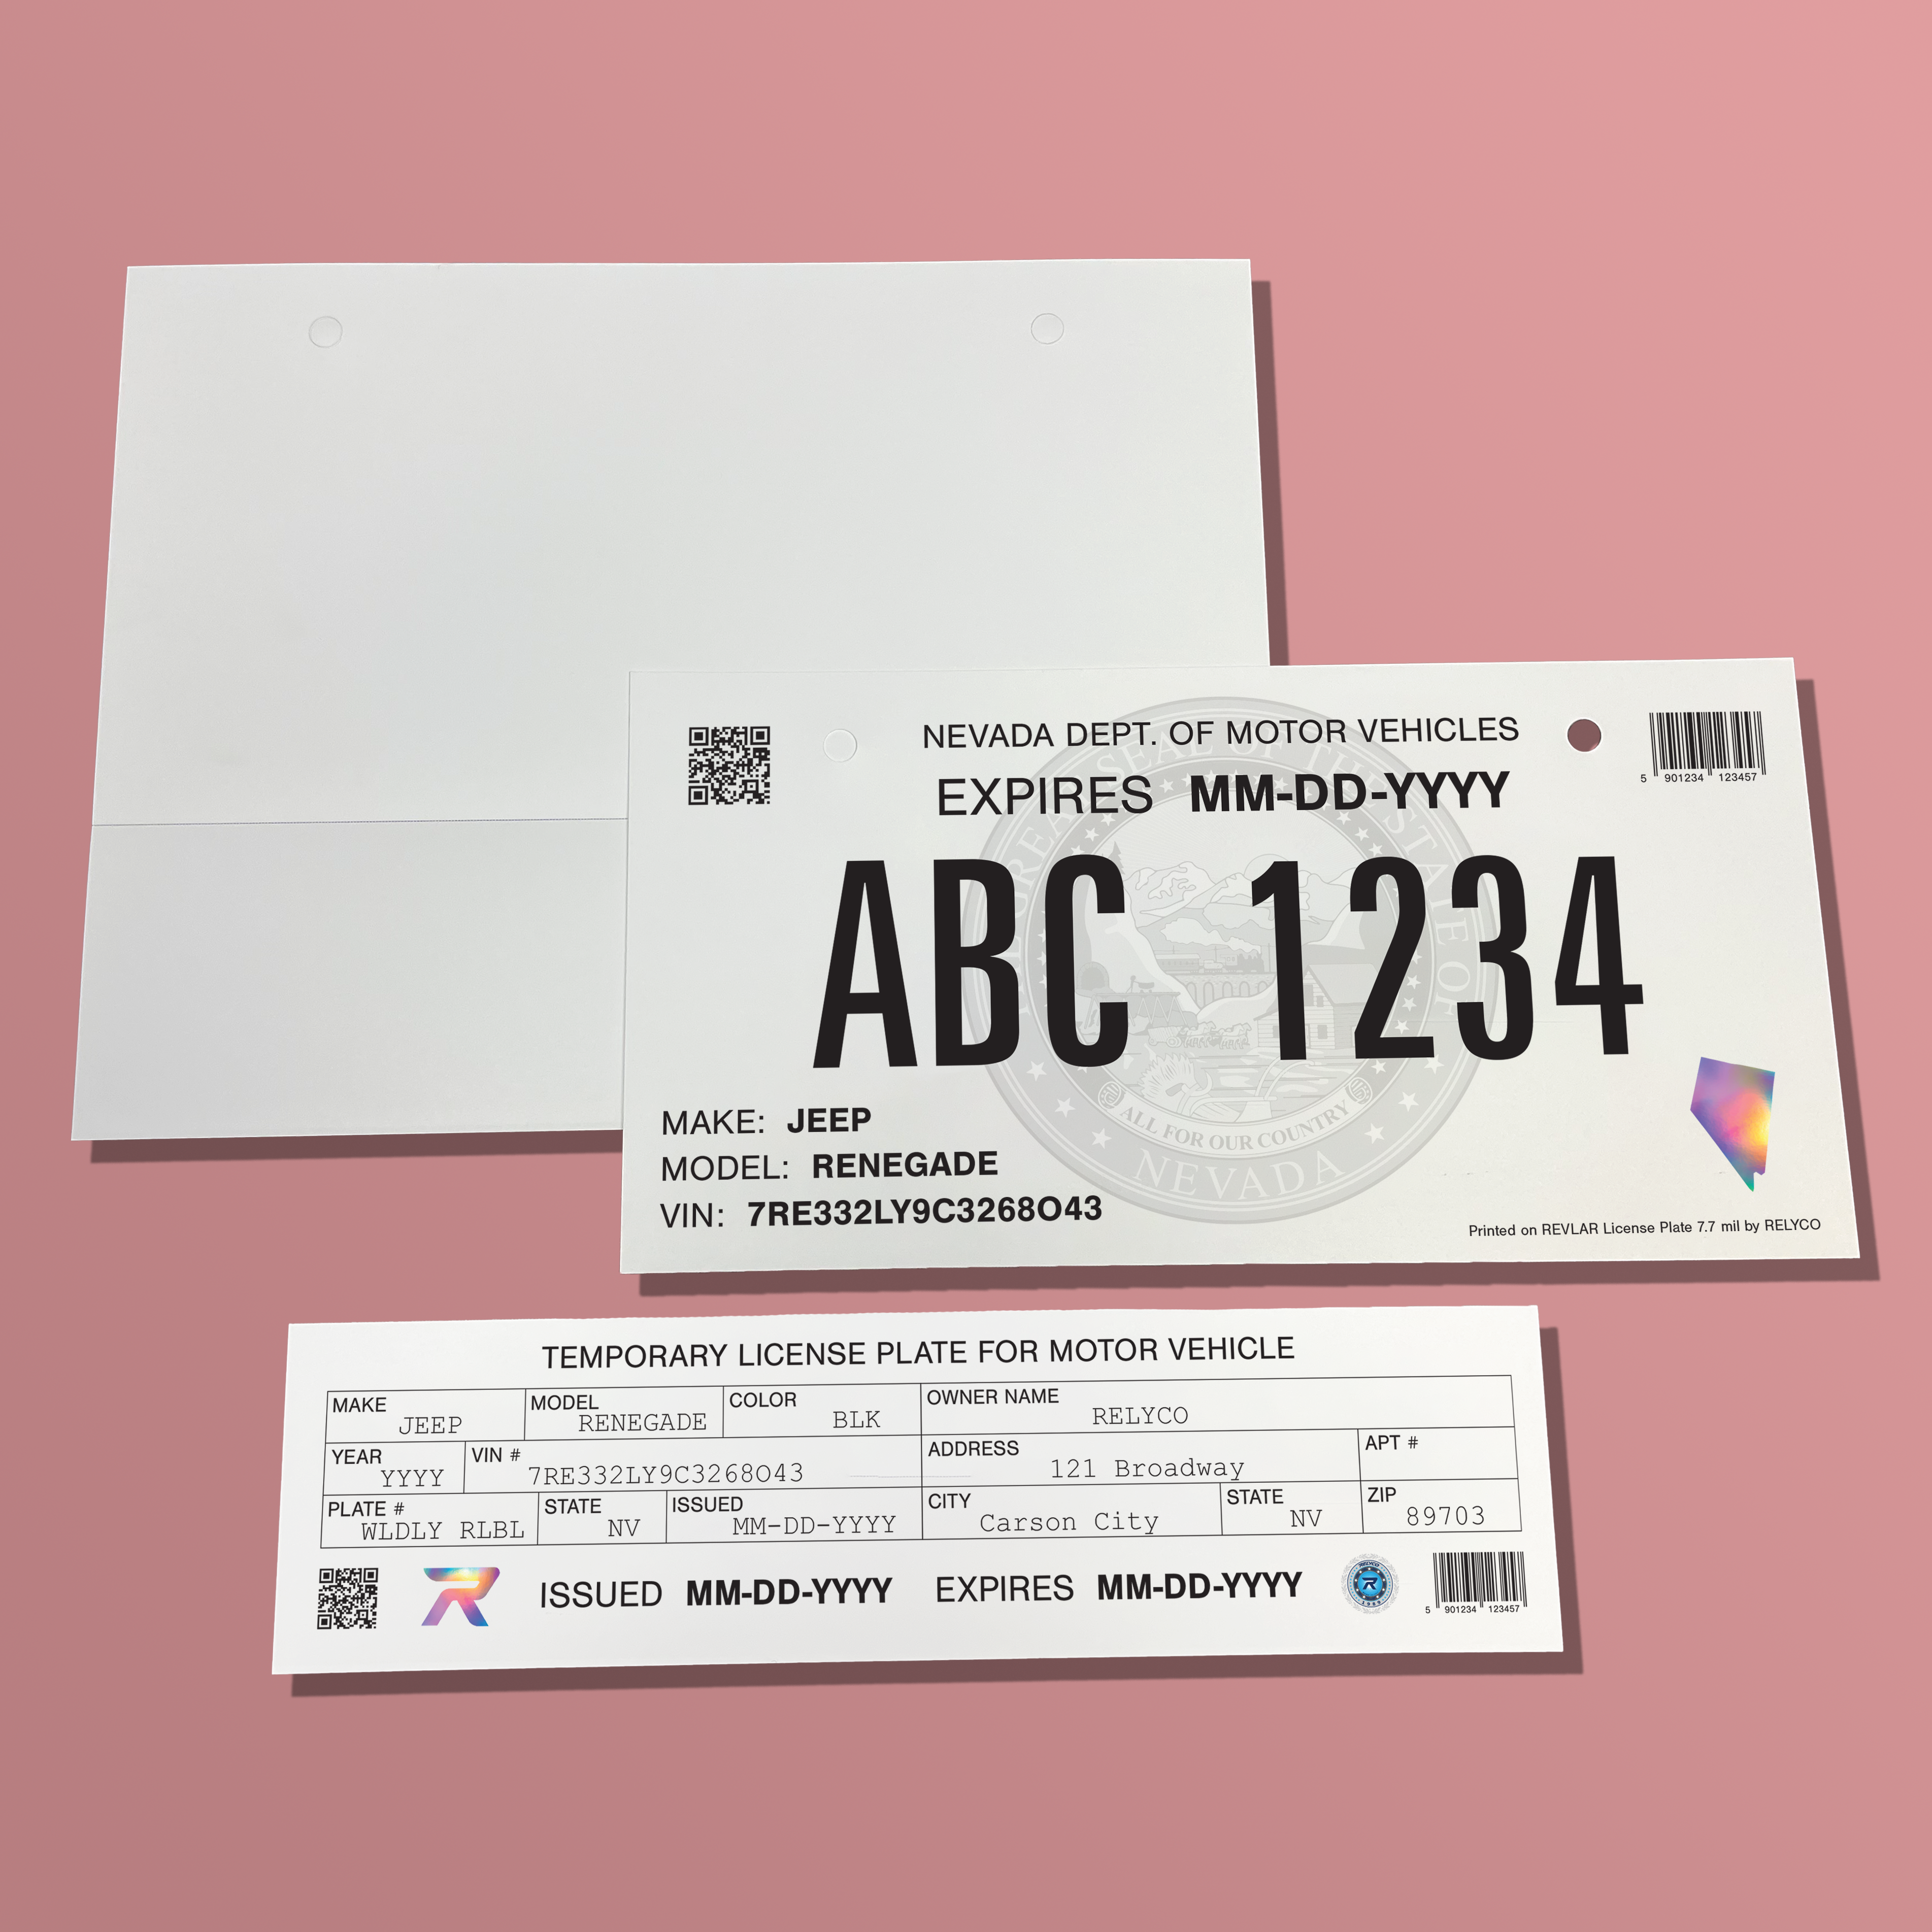 REVLAR® Temporary License Plate - Laser Printer Only with Tear-Out Record (50 Sheets)